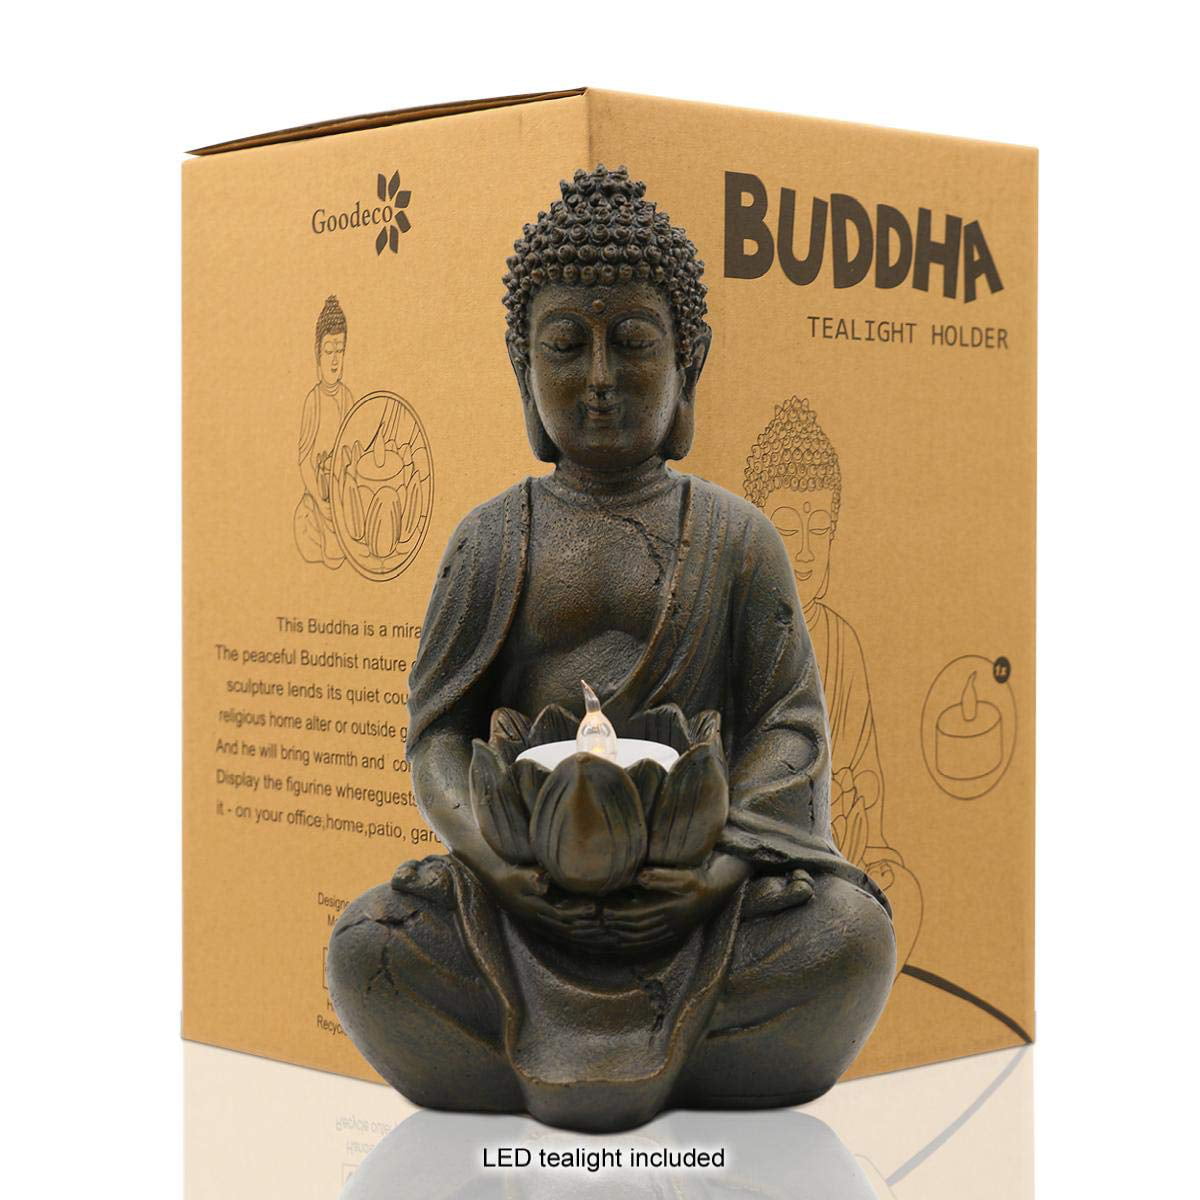 Next Grey Resin Laughing Buddha Candle Holder Tea Light Happy Budai Sculpture 